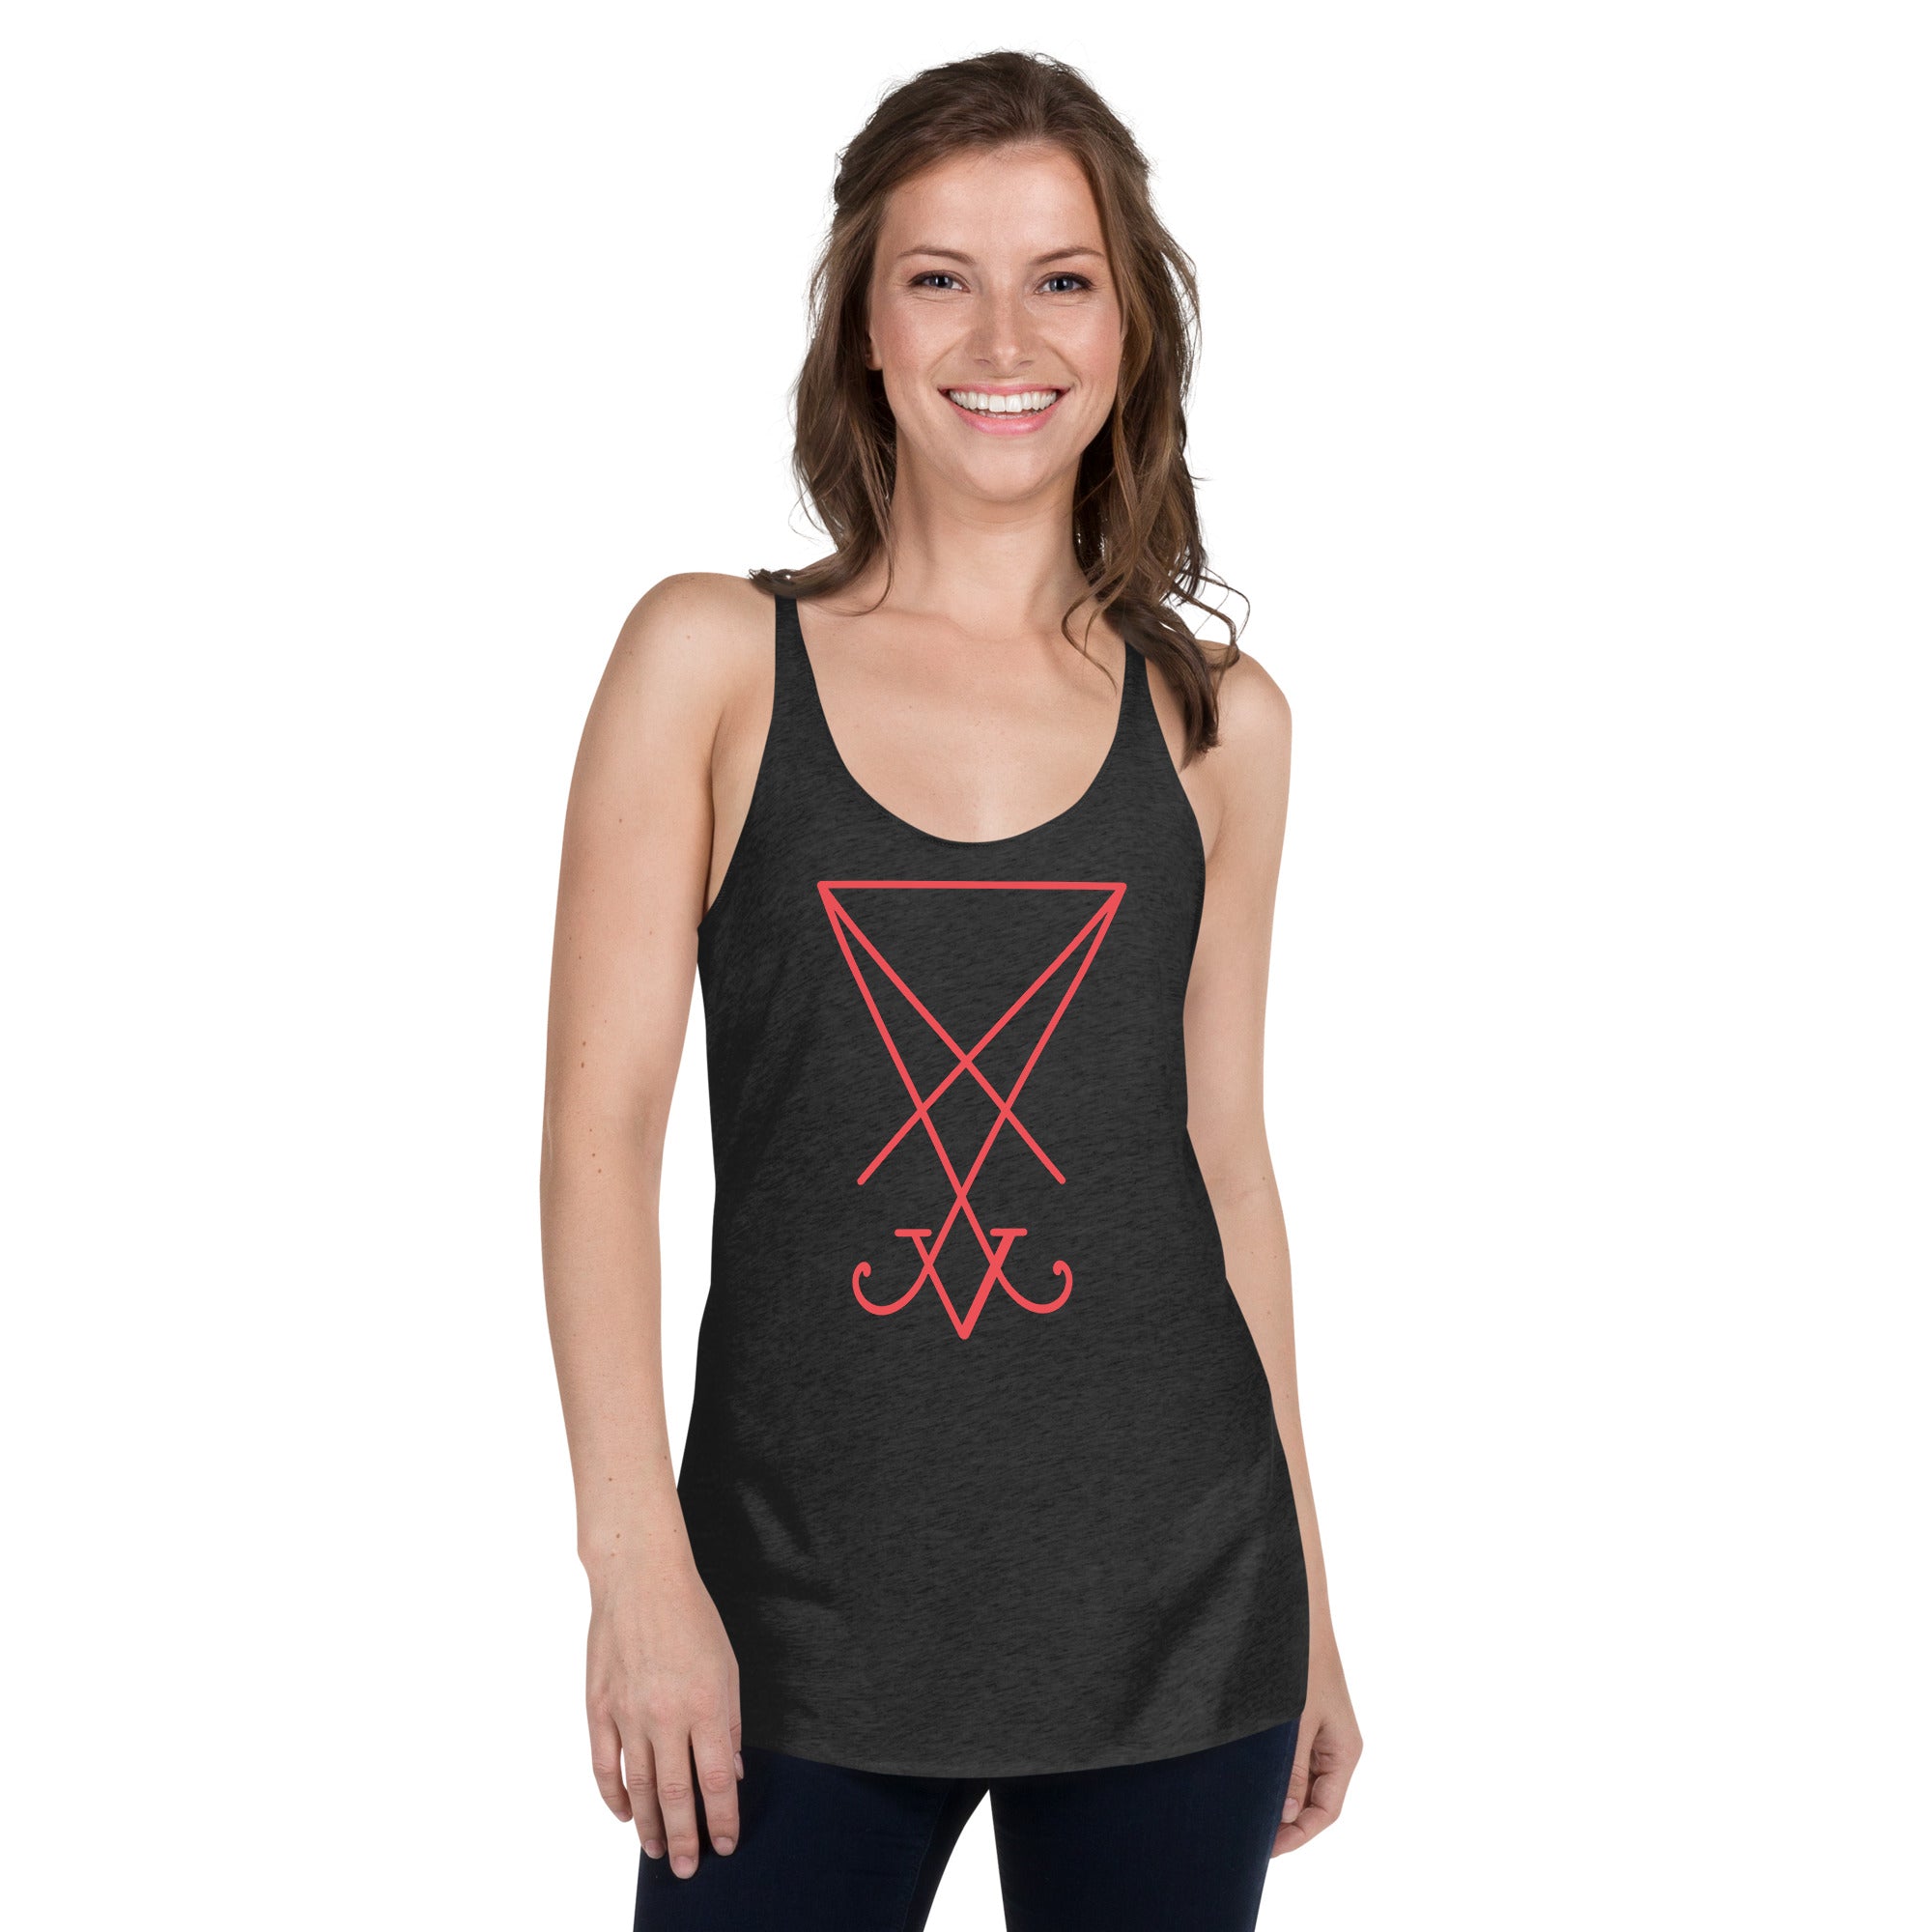 Red Sigil of Lucifer (Seal of Satan) The Grimoire of Truth Women's Racerback Tank Top Shirt